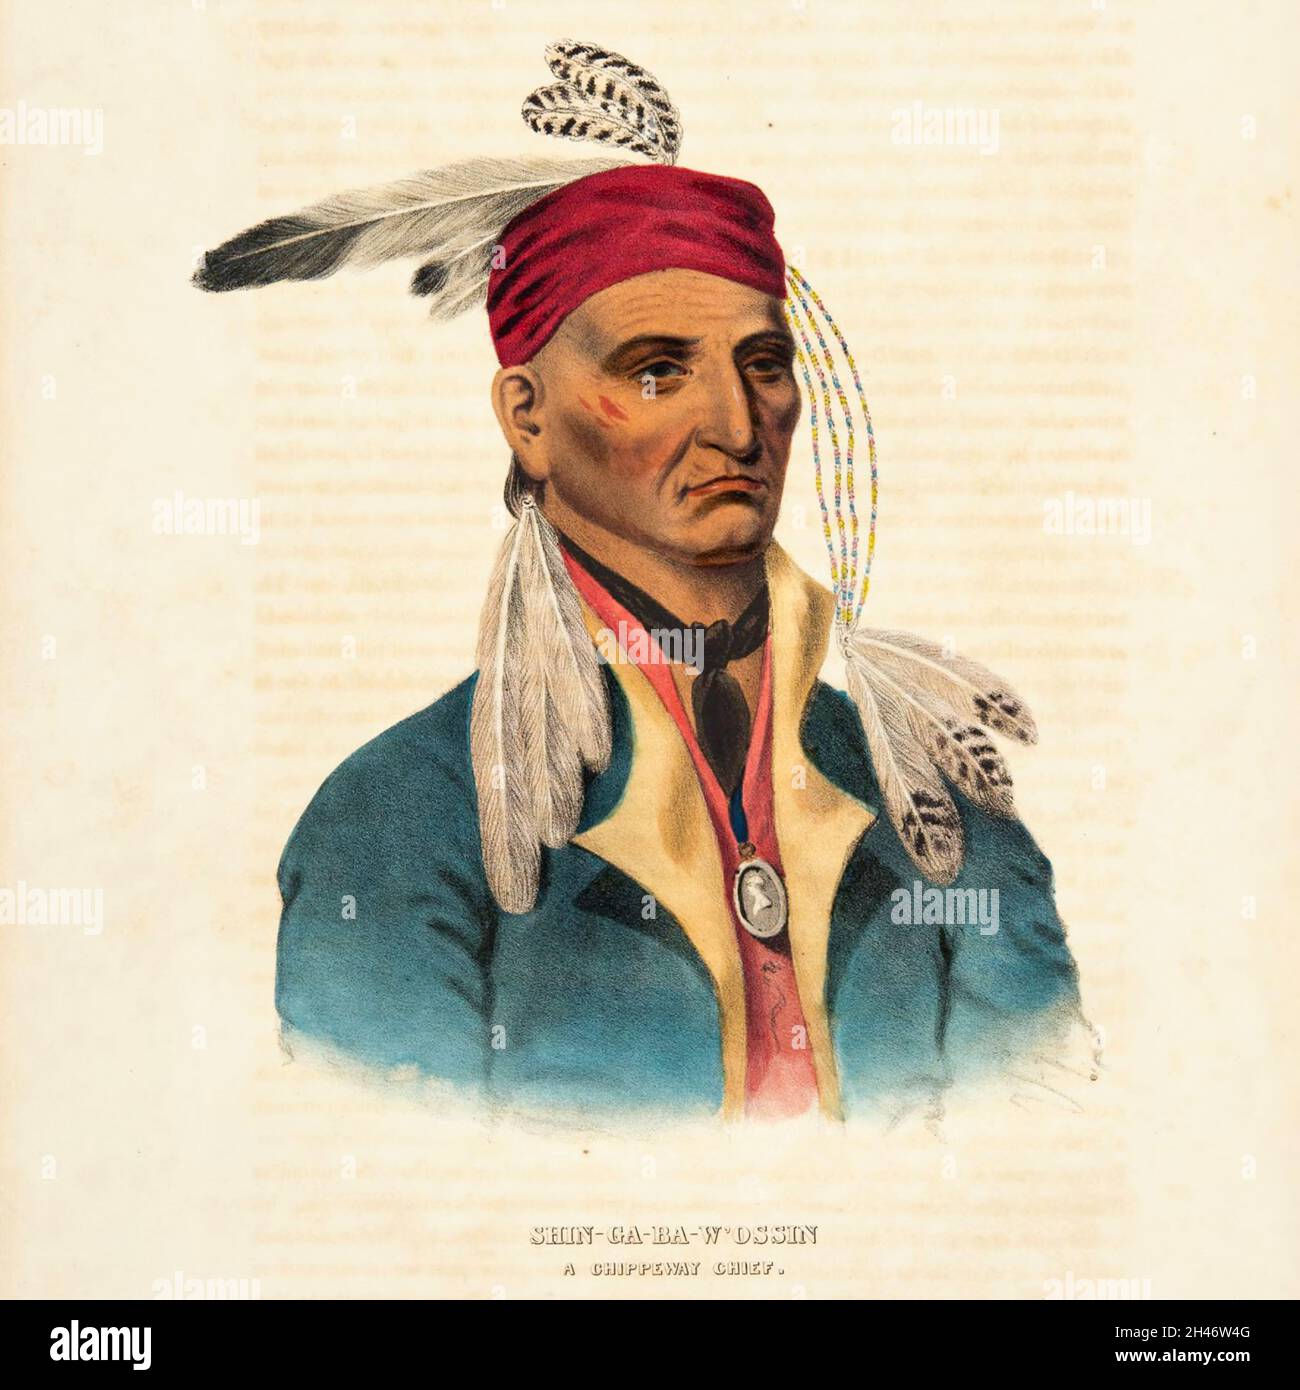 Shin-Ga-Ba-W'ossin a Chippeway Chief [Chief Shingabawossin was born about 1763. He was the grandson of Gi-chi-o-jee-de-bun and the oldest of the nine son of Naid-o-sa-gee's family, consisting of about 20 children in all from four wives. Chief Shingabawossin had one wife and twelve children. He participated in the 1783 Battle of St. Croix Falls, under the leadership of La Pointe Chief Waubojeeg. During the War of 1812, he was enlisted by the British to fight against the Americans and went to York to join Tecumseh's War] from the book ' History of the Indian Tribes of North America with biograph Stock Photo